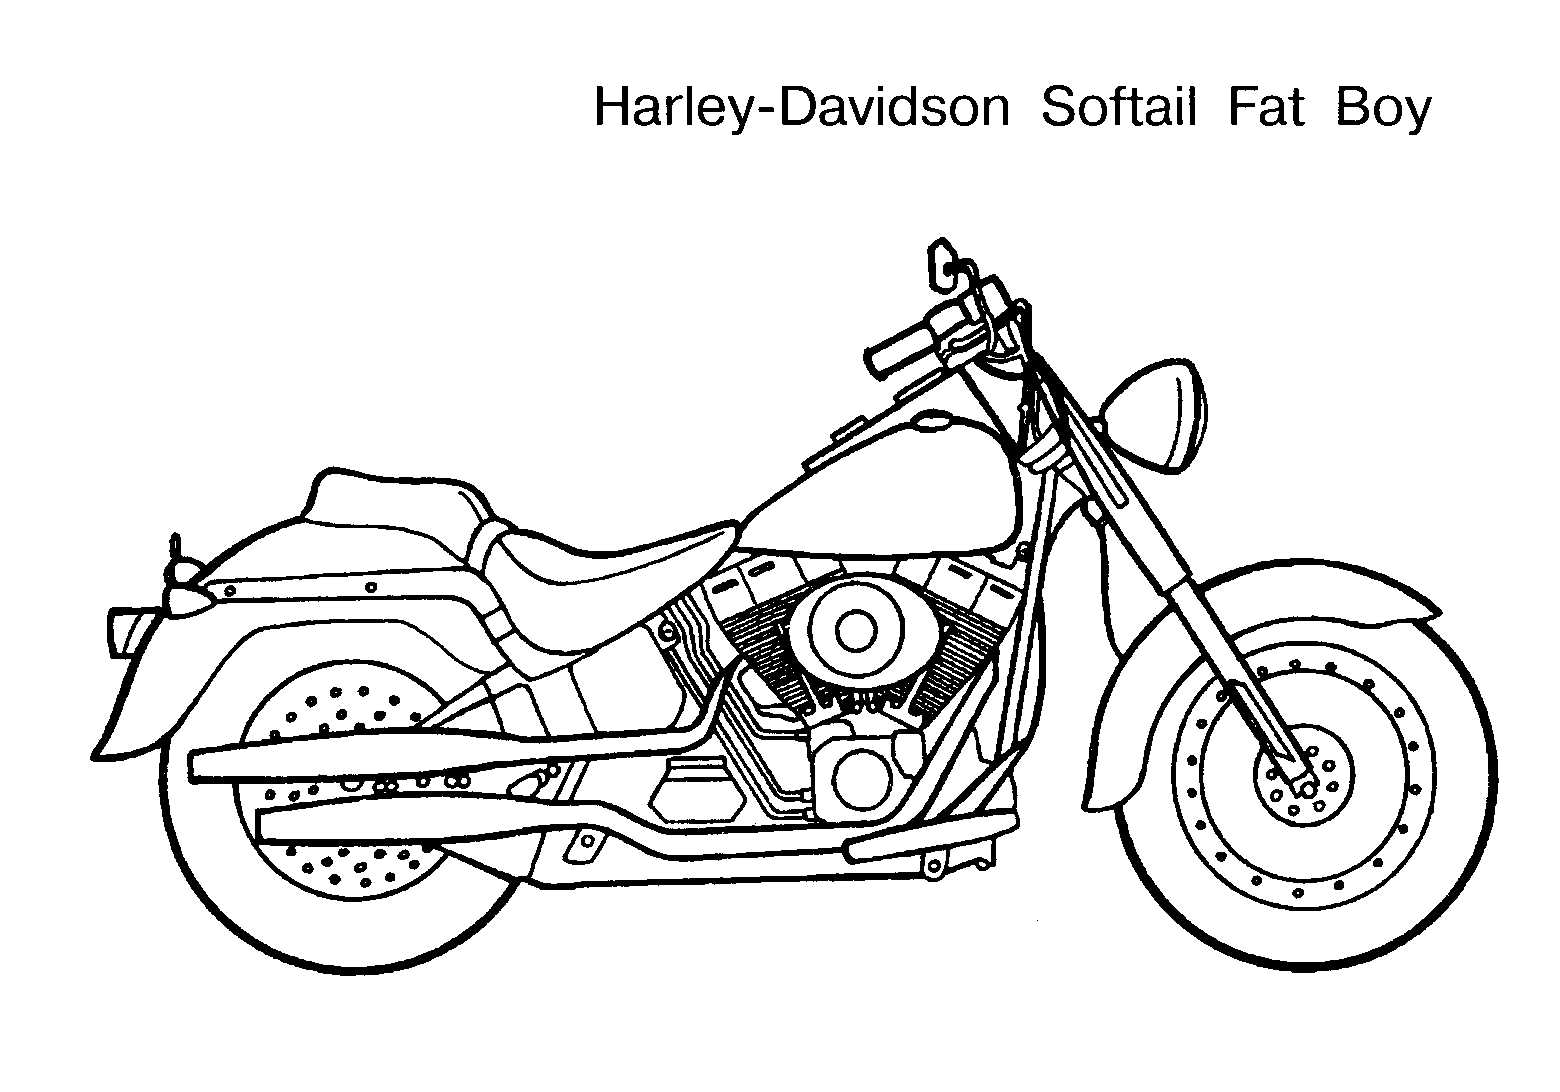 Coloring pages for boys of 11-12 years to download and print for free